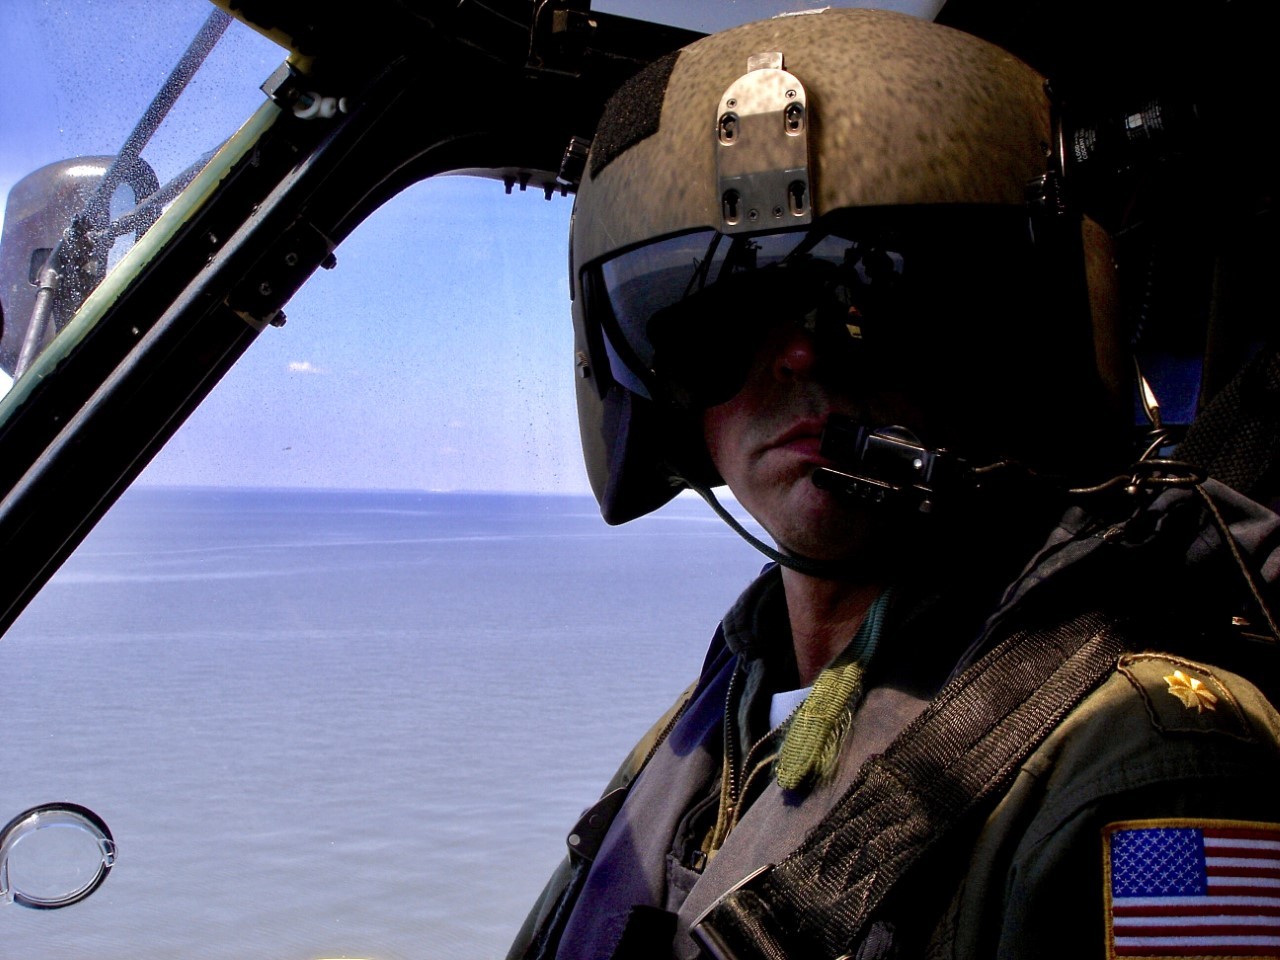 Lt. Cmdr. Jim O’Keefe in the co-pilot seat of a Coast Guard helicopter during flight operations over water. (Photograph courtesy of James O’Keefe)